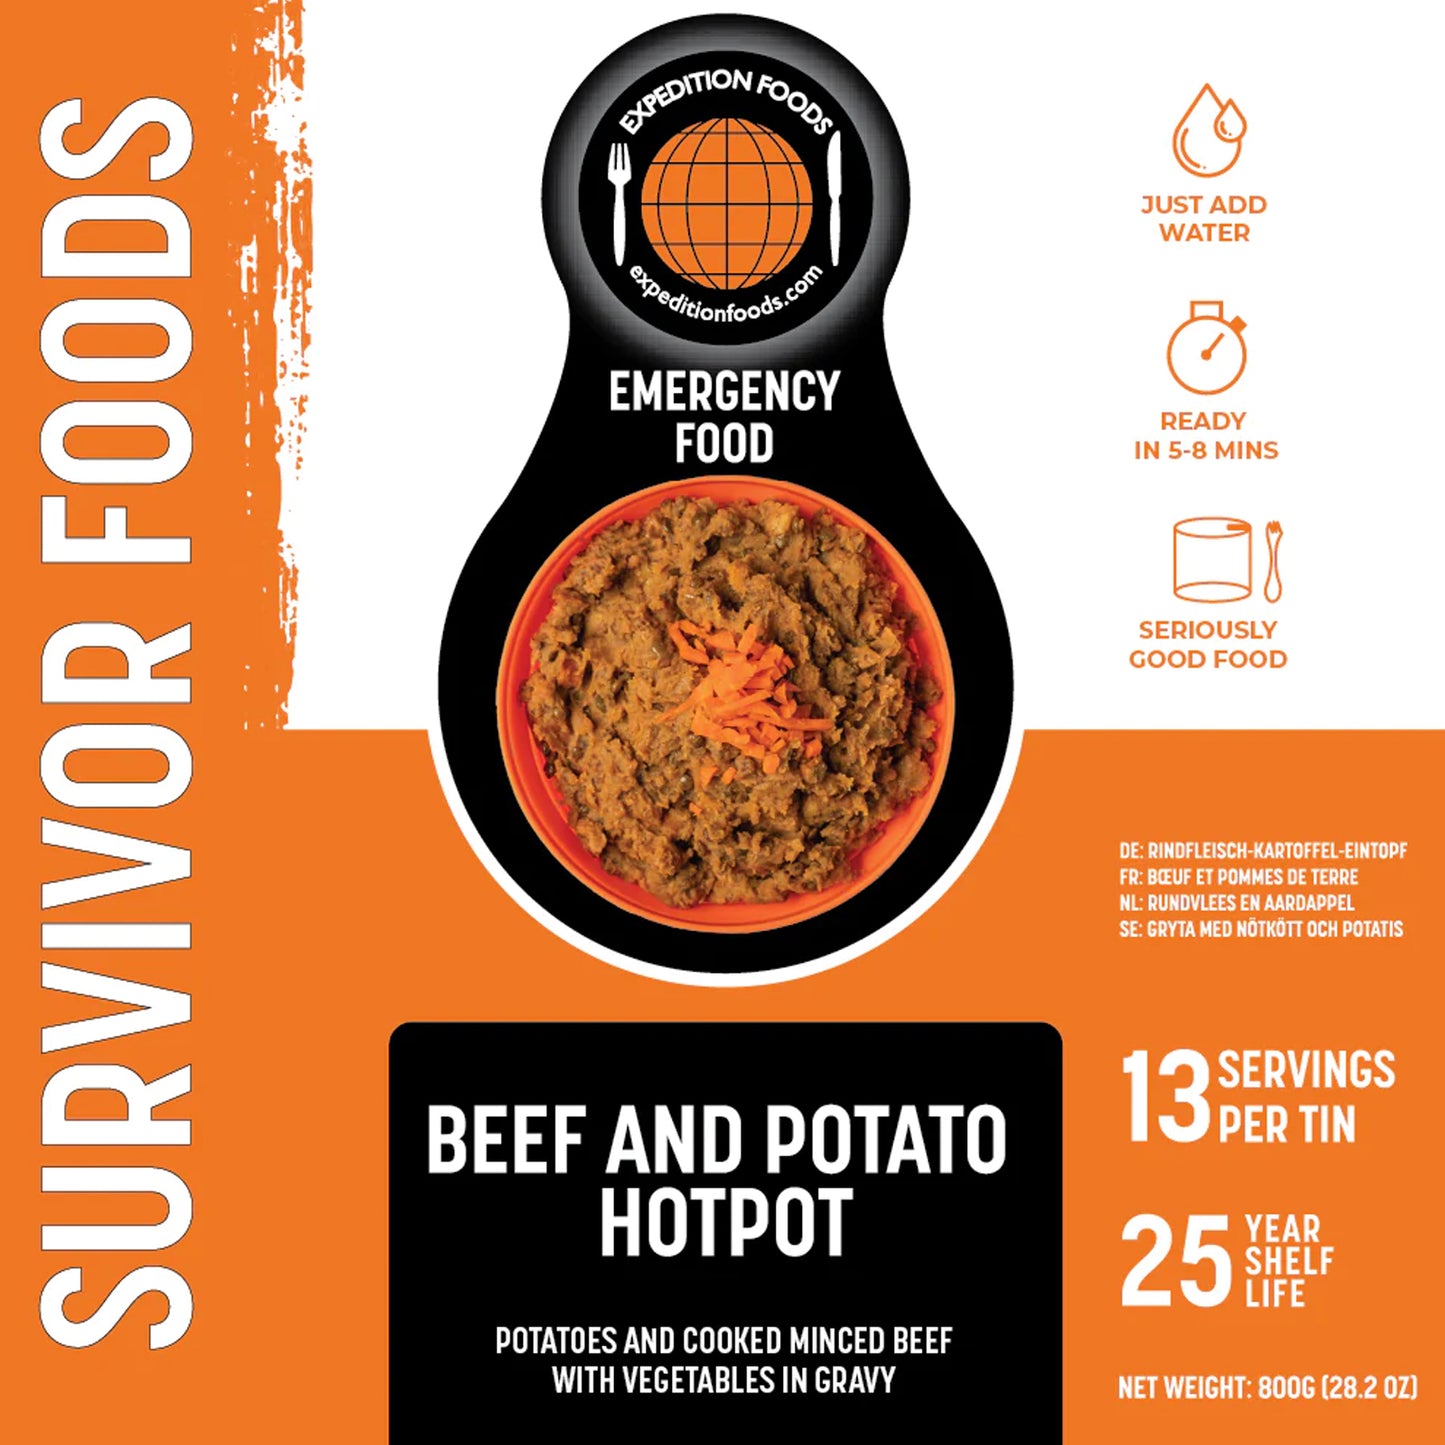 Expedition Foods Beef and Potato Hotpot Meal Details